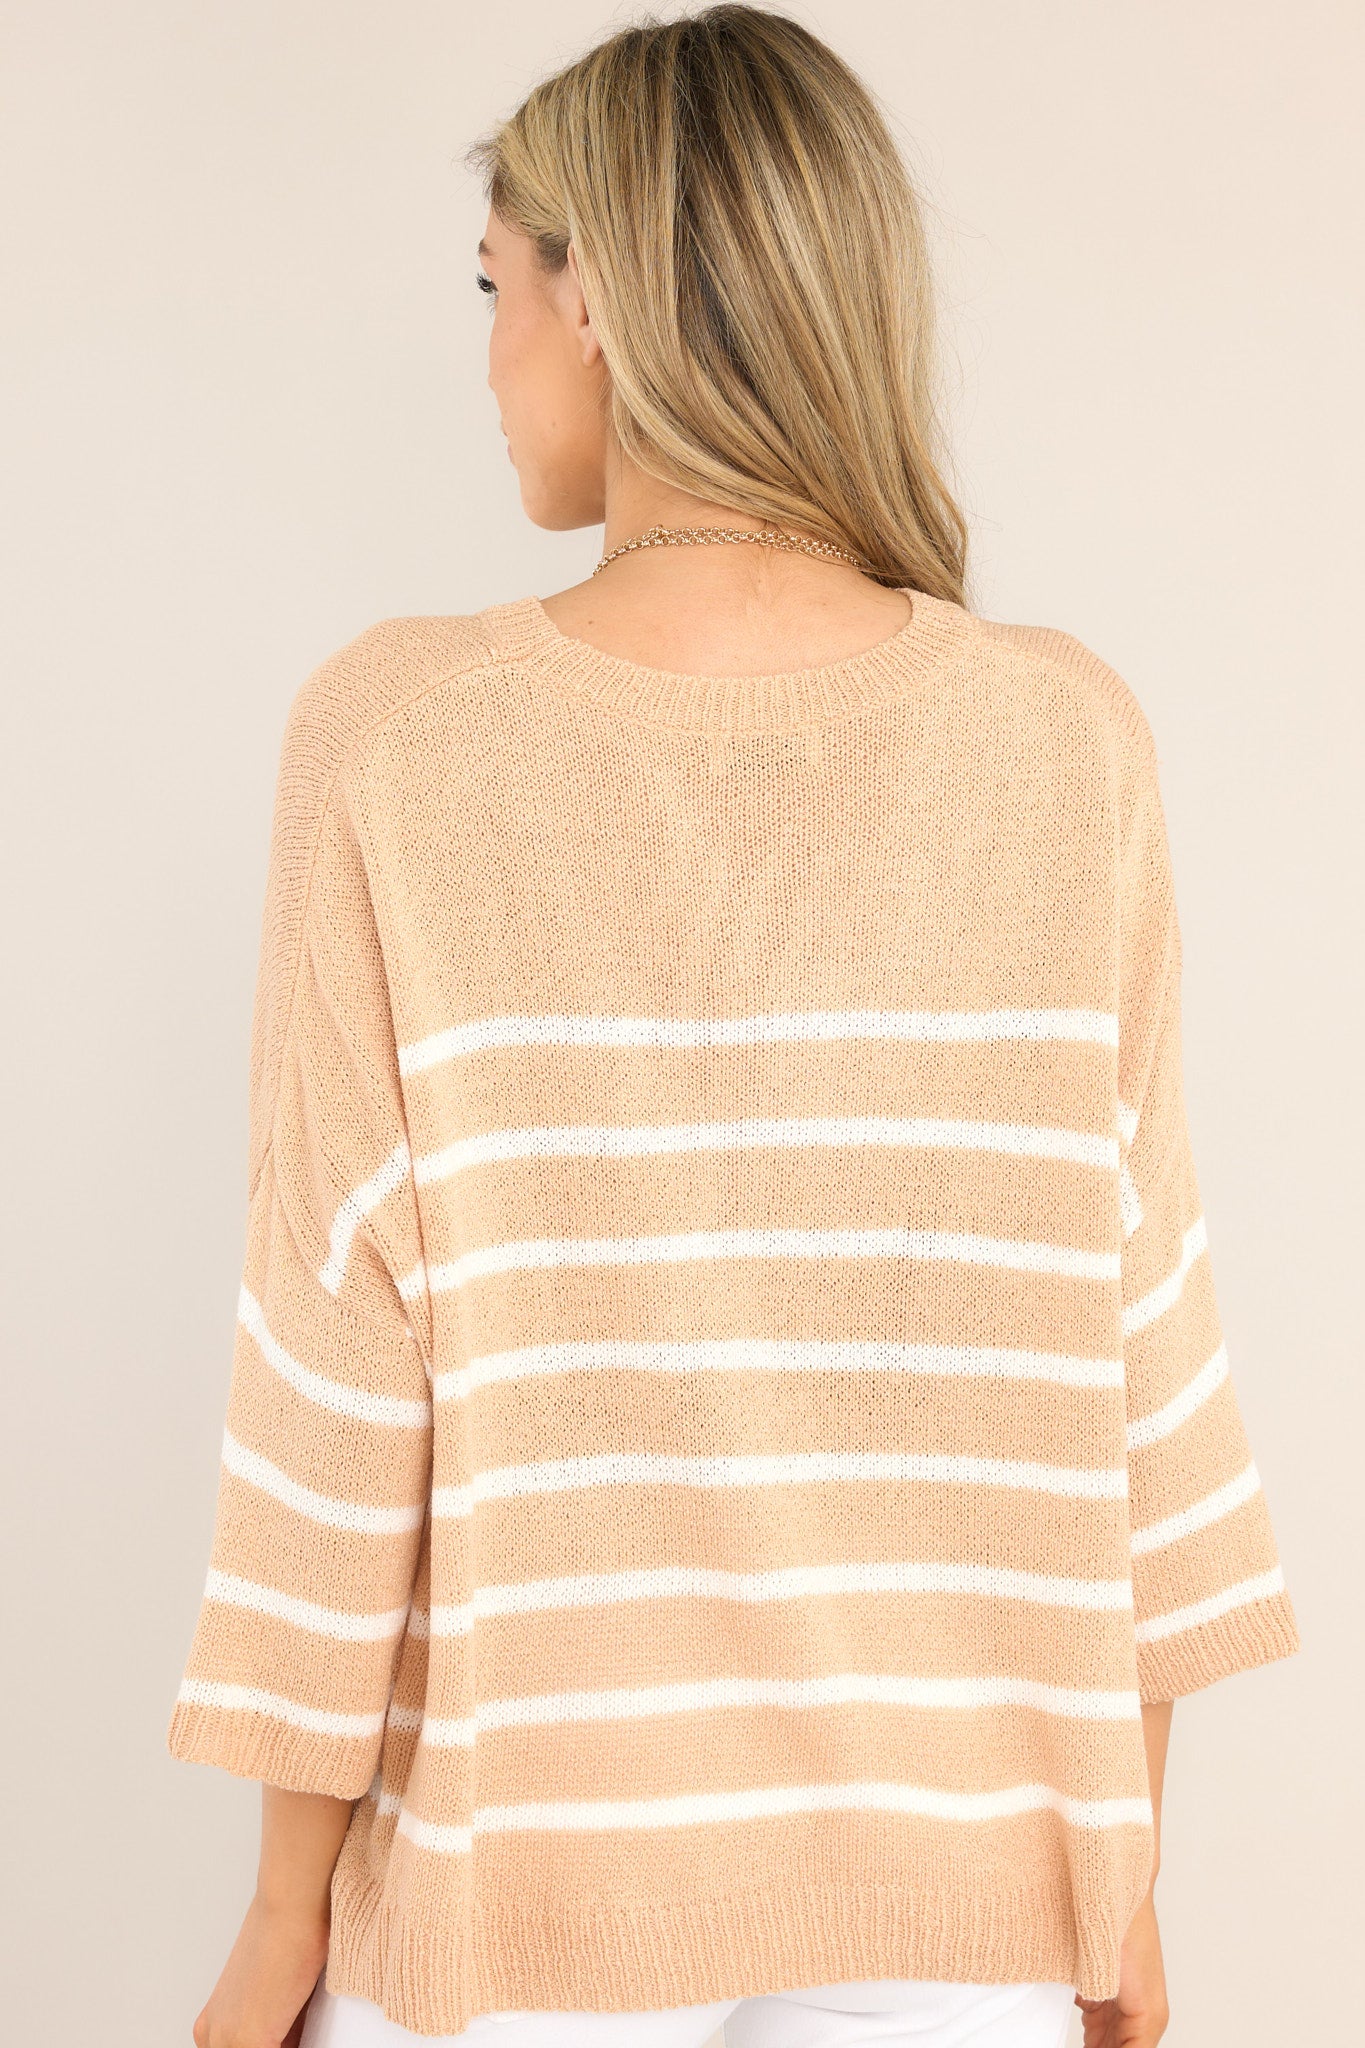 Back view of this top that features a ribbed crew neckline, dropped shoulders, 3/4 length sleeves, and a split hemline.